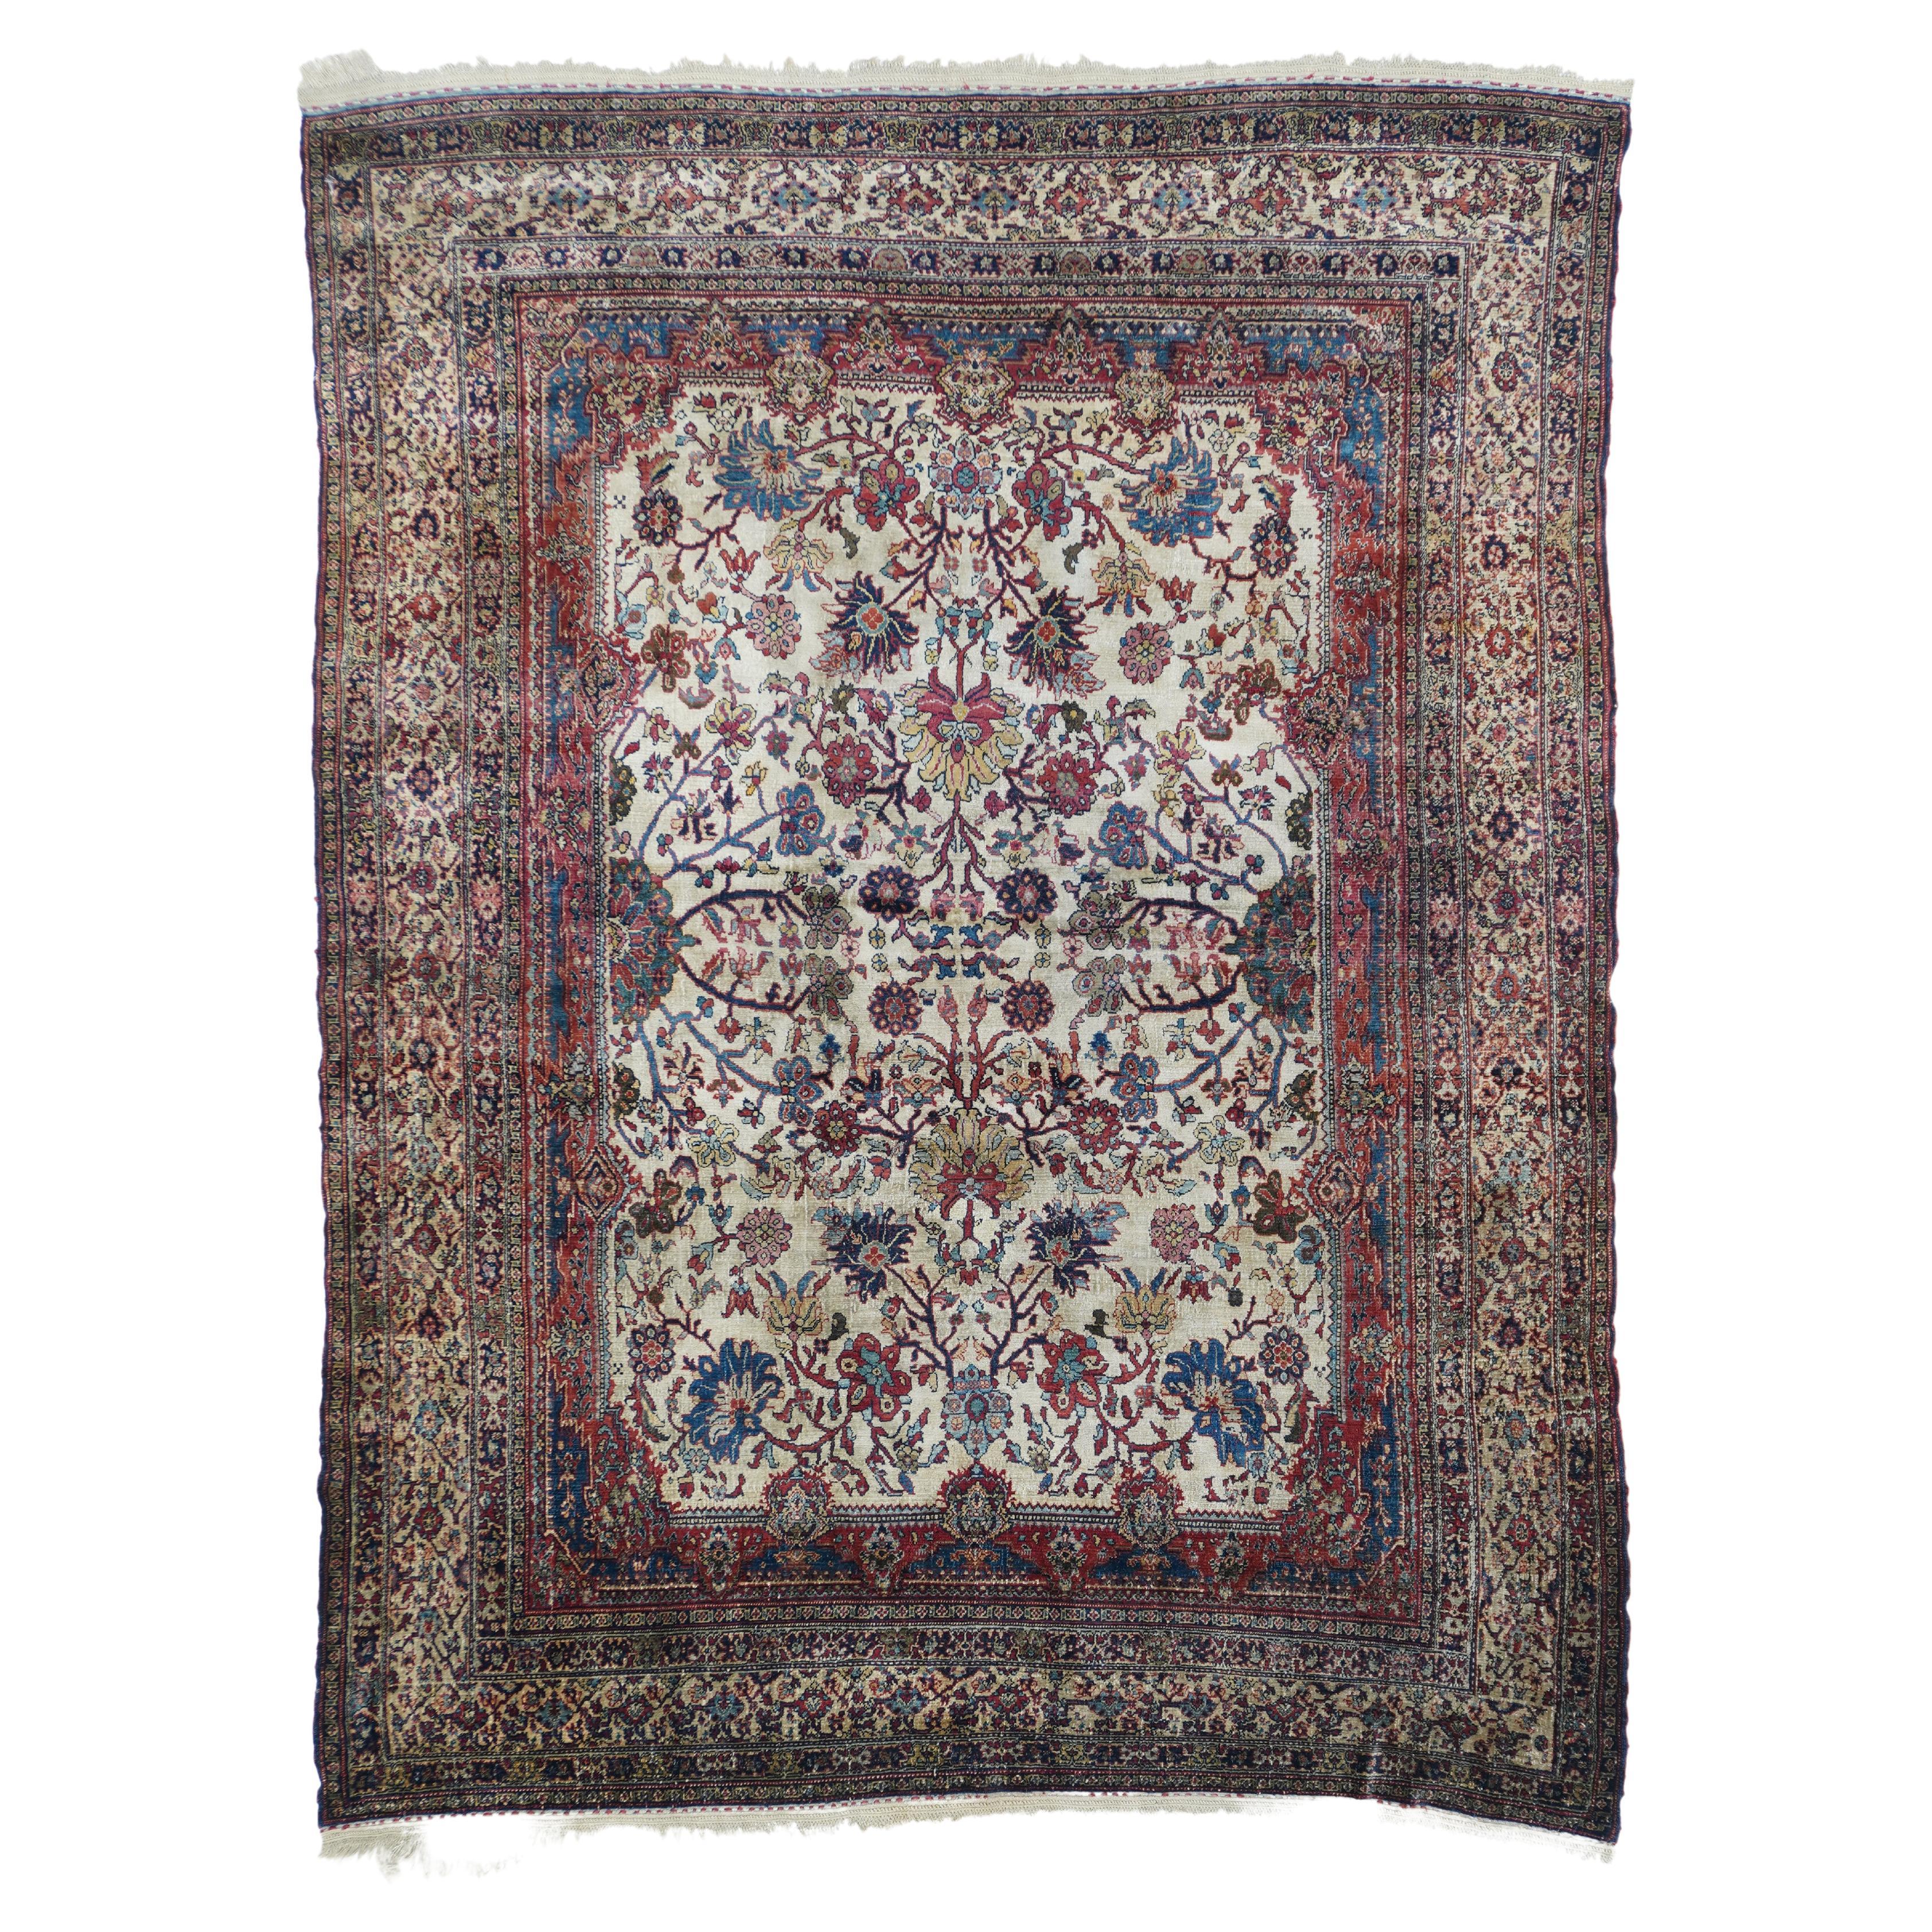 Extreamly Fine Antique and Rare Persian 100% Silk Senneh Rug For Sale